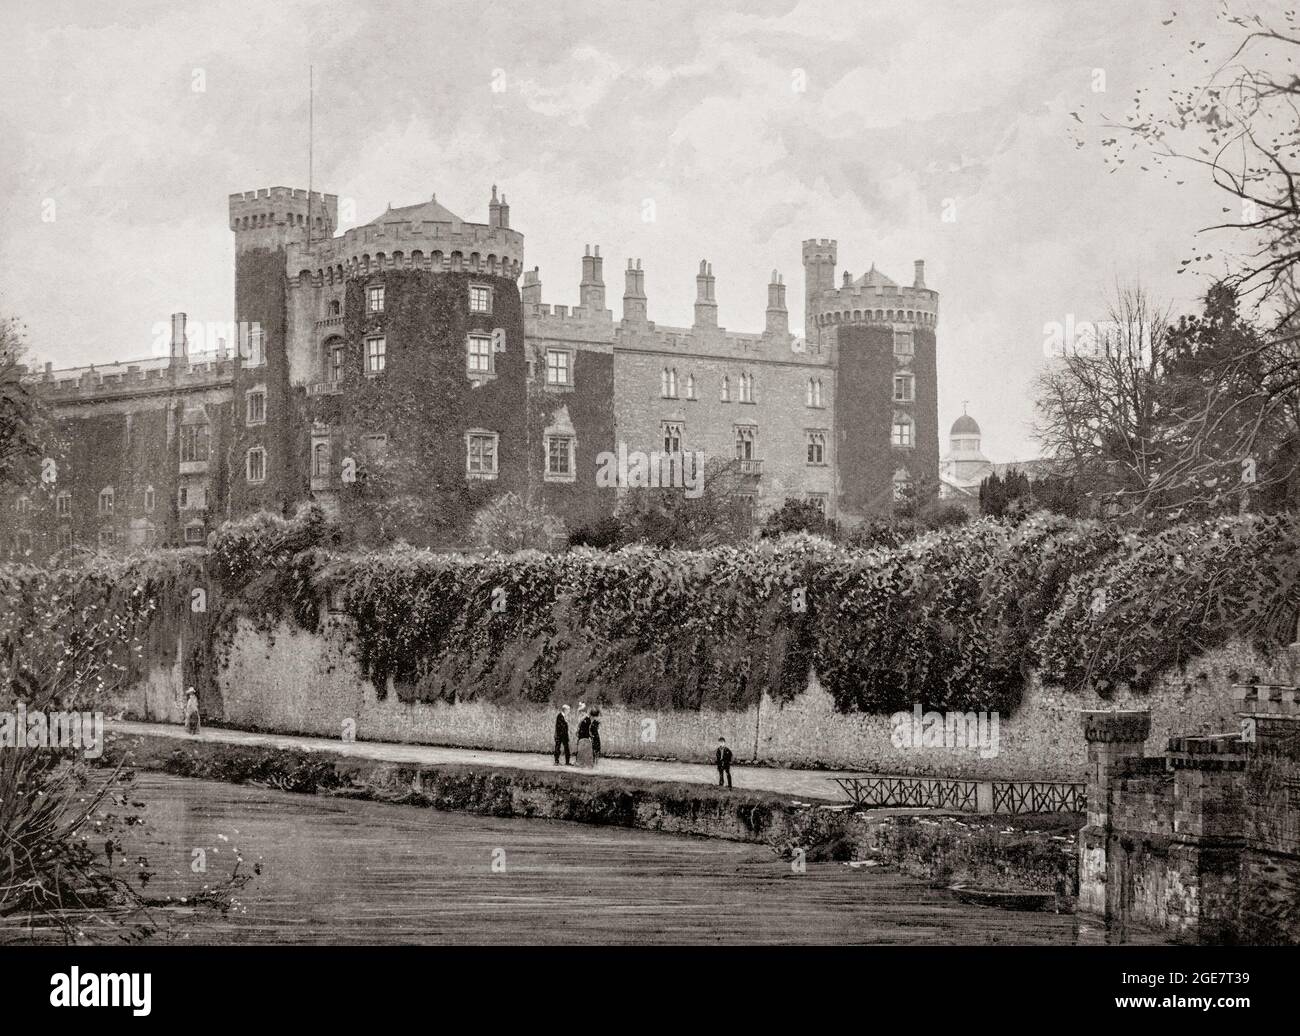 A late 19th century view of Ireland's Kilkenny Castle built in 1195 to control a fording-point of the River Nore and several routeways. It has been important since the 12th century when Richard de Clare, 2nd Earl of Pembroke, commonly known as Strongbow constructed the first castle. It then became the seat of the Butlers of Ormonde who arrived in Ireland with the Norman invasion. In the 17th century, the 'Supreme Council' of the Catholic rebel movement, Confederate Ireland, met in Kilkenny Castle from 1642-48 while James Butler, the Lord Lieutenant of Ireland, was in Dublin. Stock Photo